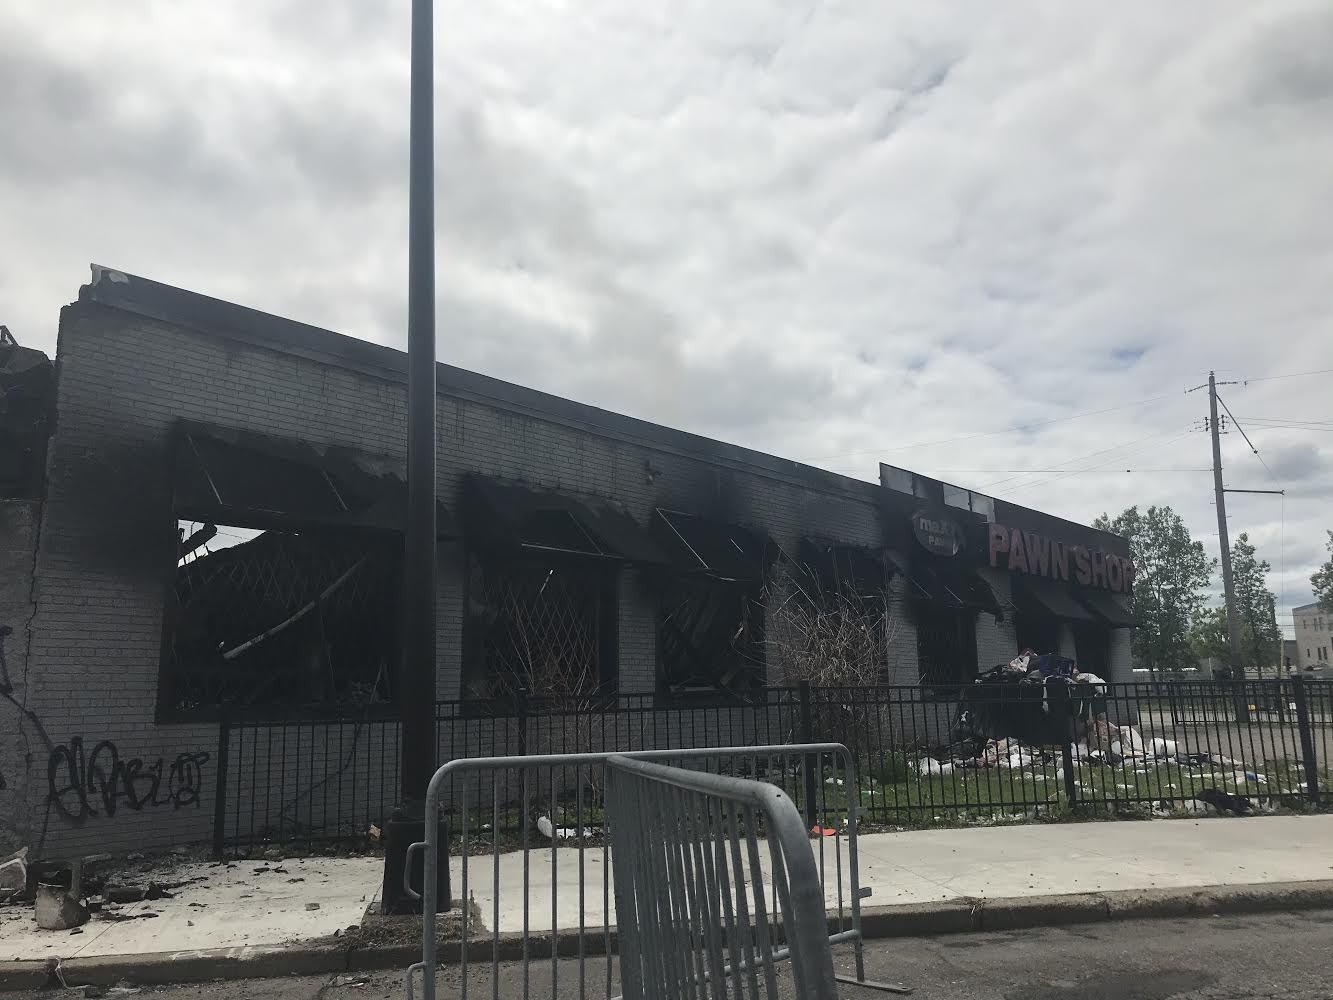 MaX it PAWN was among the businesses extensively damaged in Thursdays riots. Cedar-Riverside is the southernmost University-area neighborhood, making it closer to where the first protests began. 